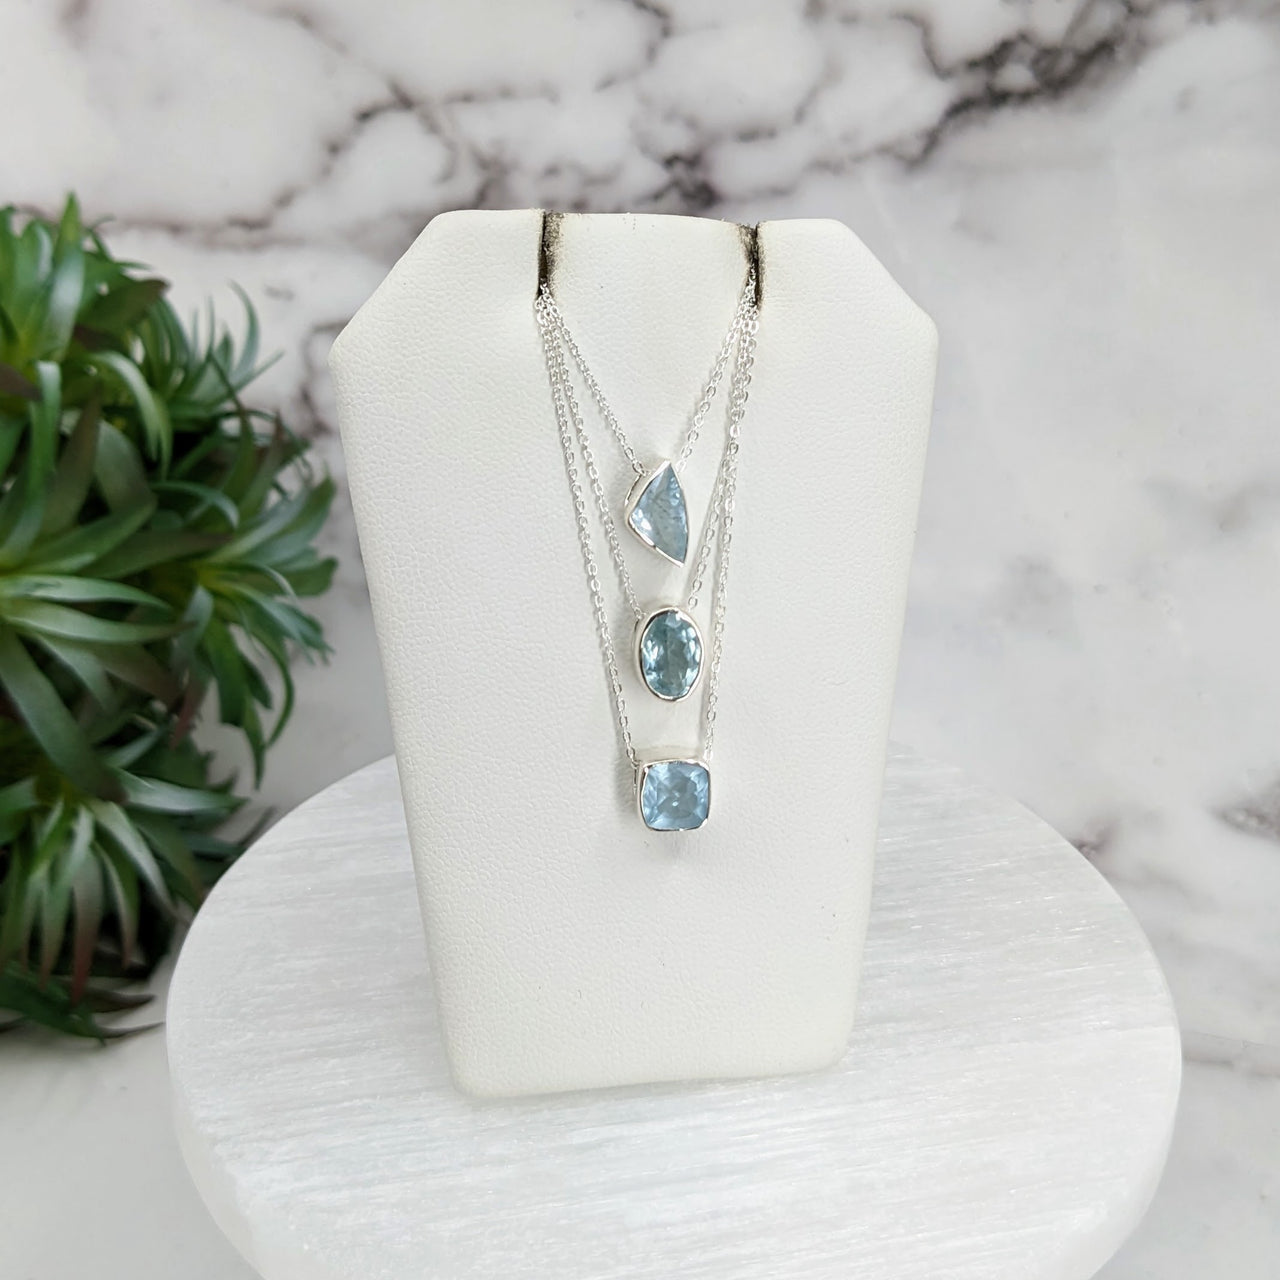 Aquamarine Faceted Necklace Sterling Silver Slider Pendant on 18" Chain #LV3253